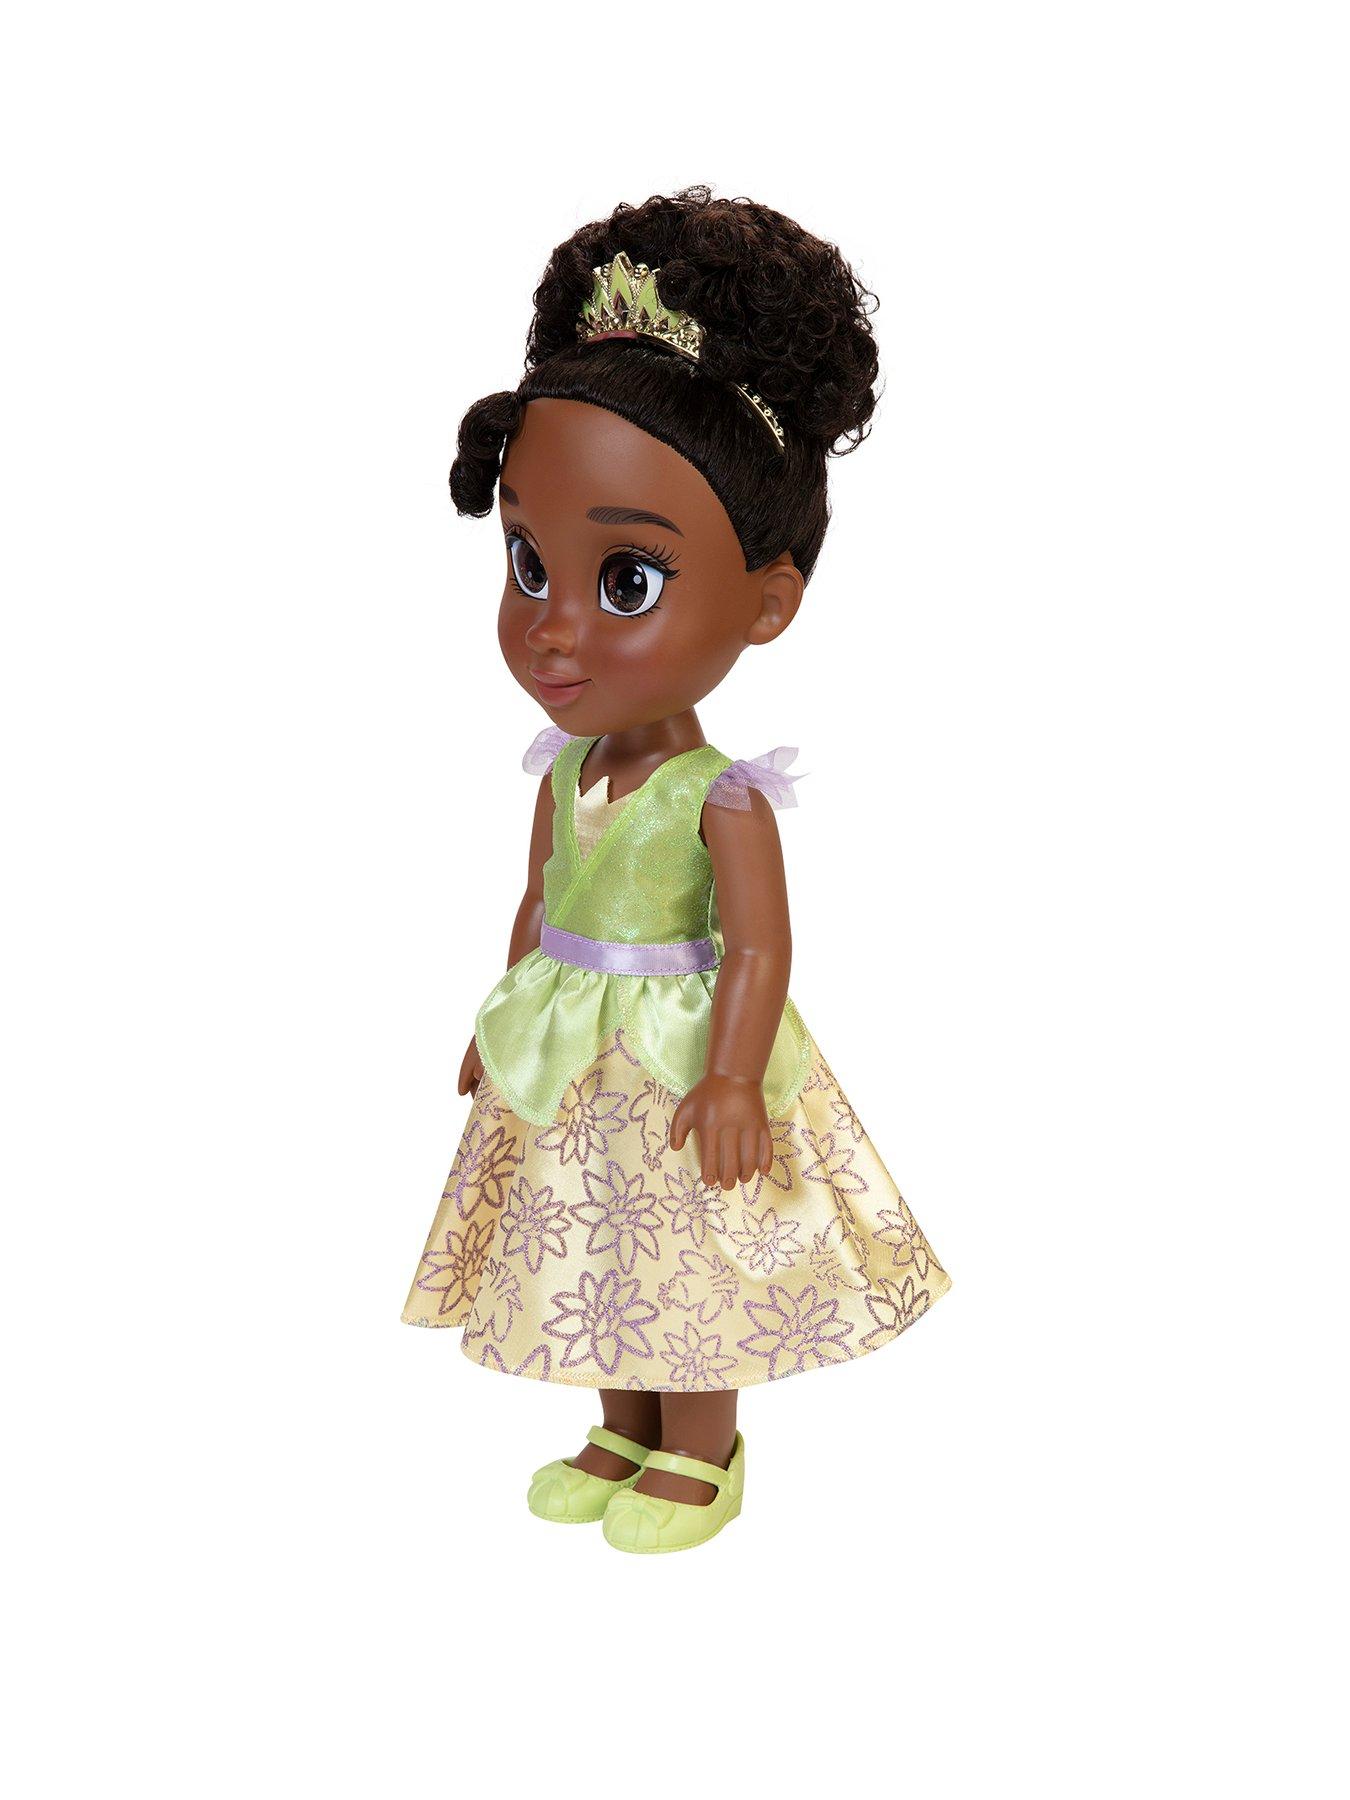 Disney Princess Lil' Friends Plush Tiana & Naveen 14.5-inch Plush Doll,  Officially Licensed Kids Toys for Ages 3 Up, Gifts and Presents by Just Play